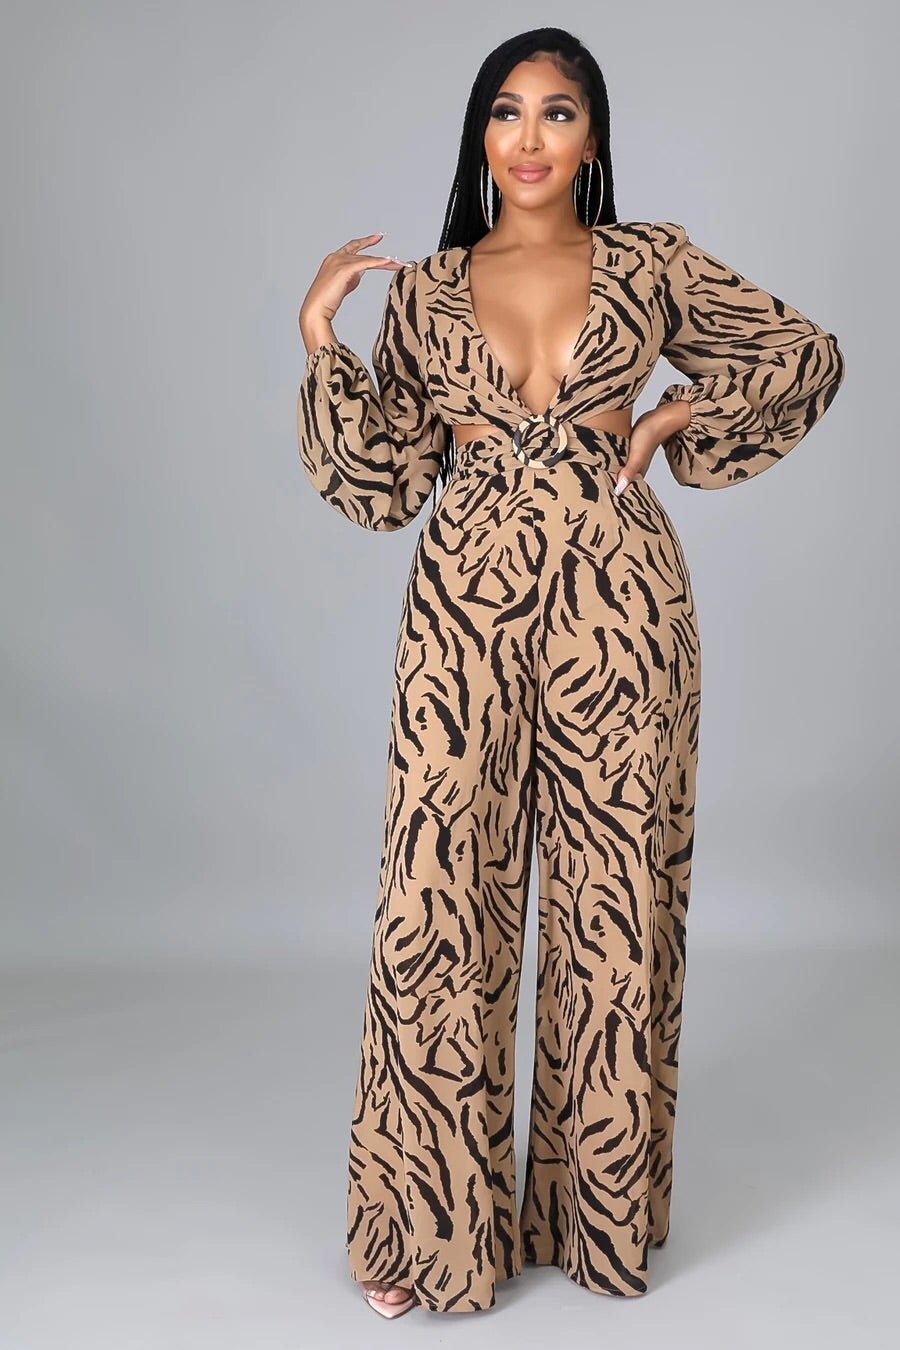 Run Free Lace Up Tiger Print Jumpsuit Multicolor Camel - Ali’s Couture 